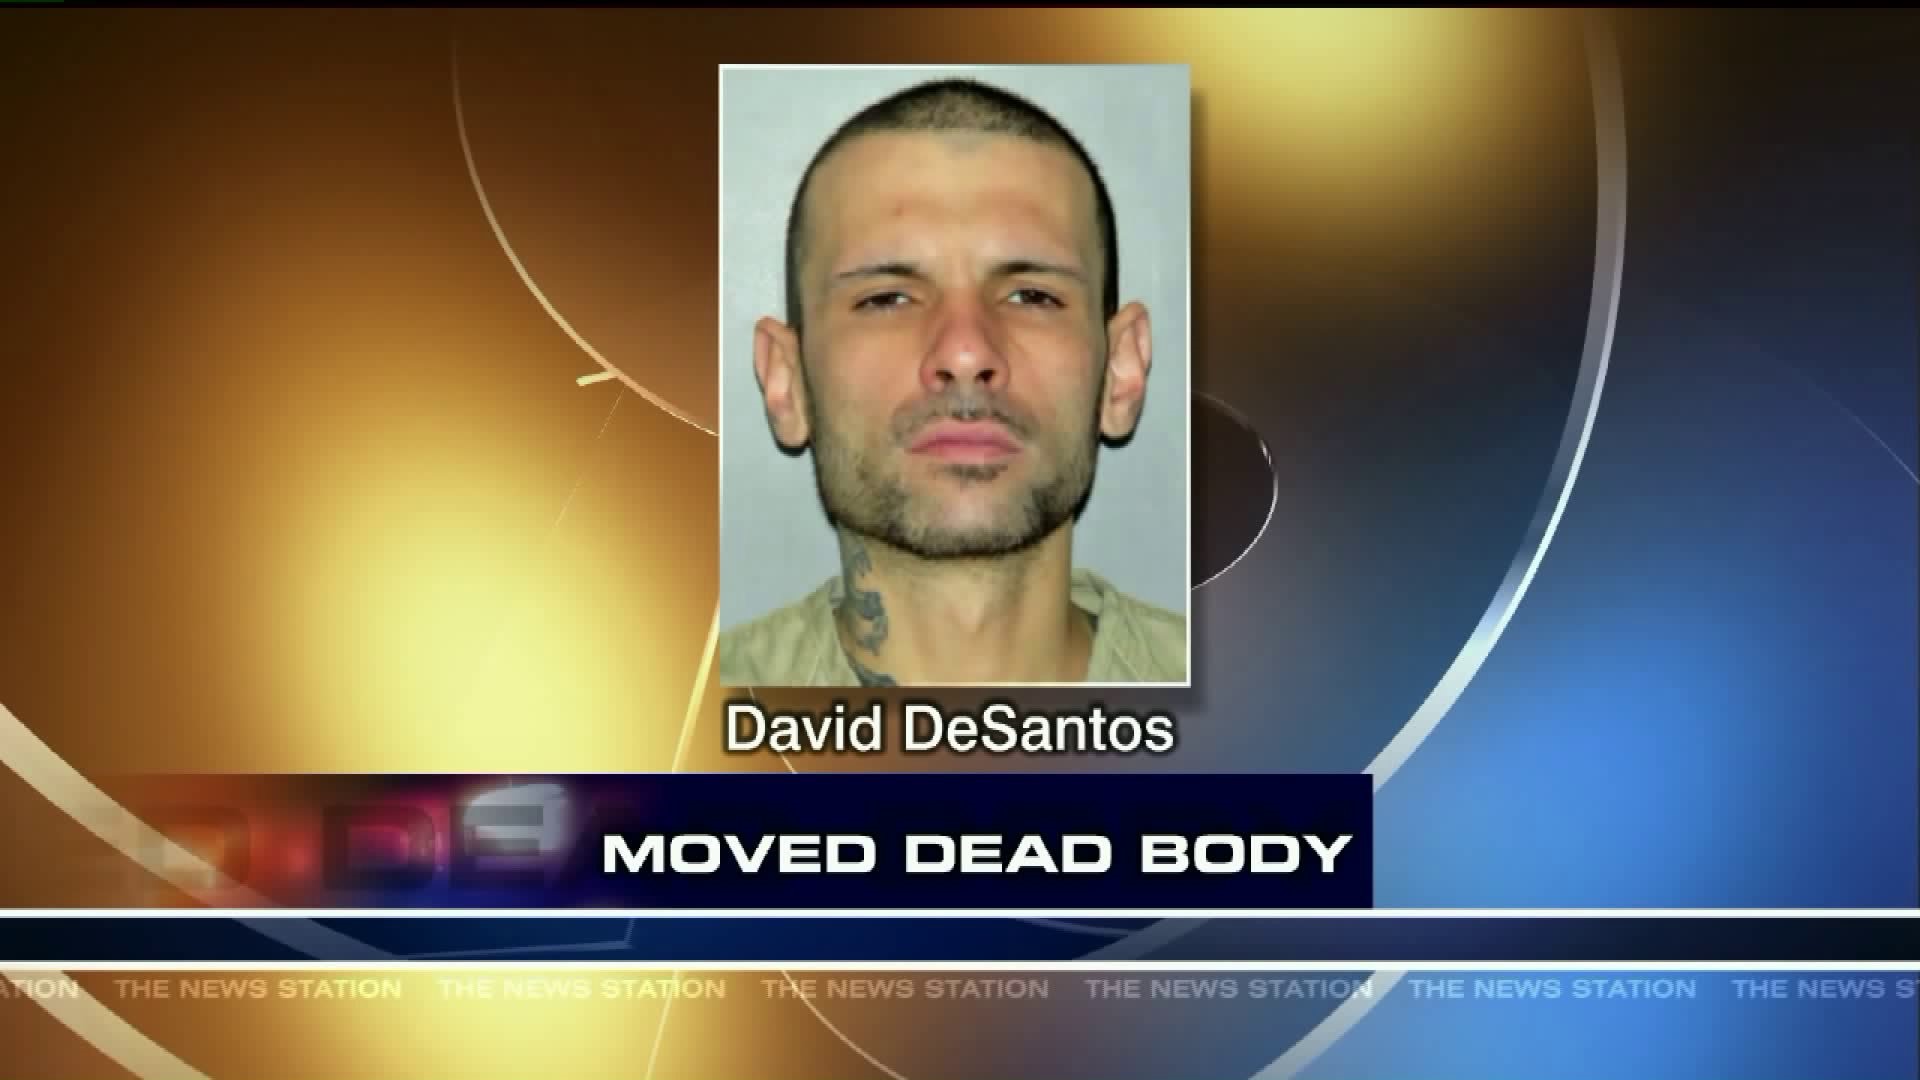 Monroe County Man Charged For Moving Dead Body in NJ